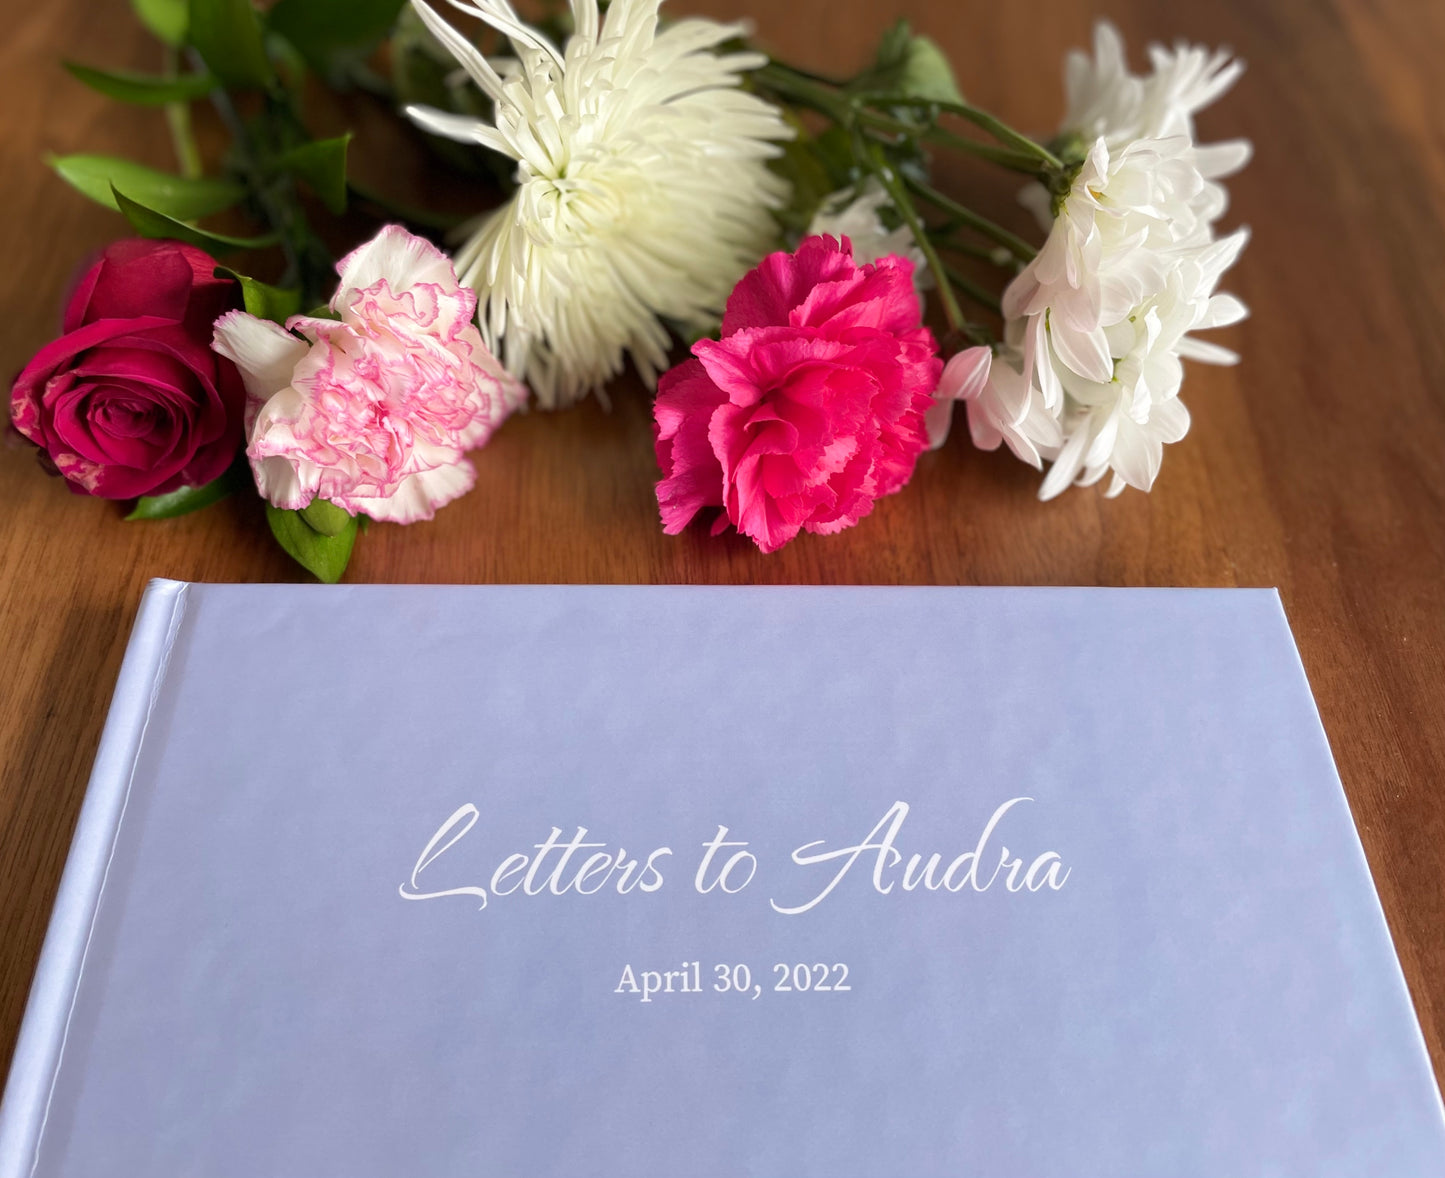 Letters to the Bride